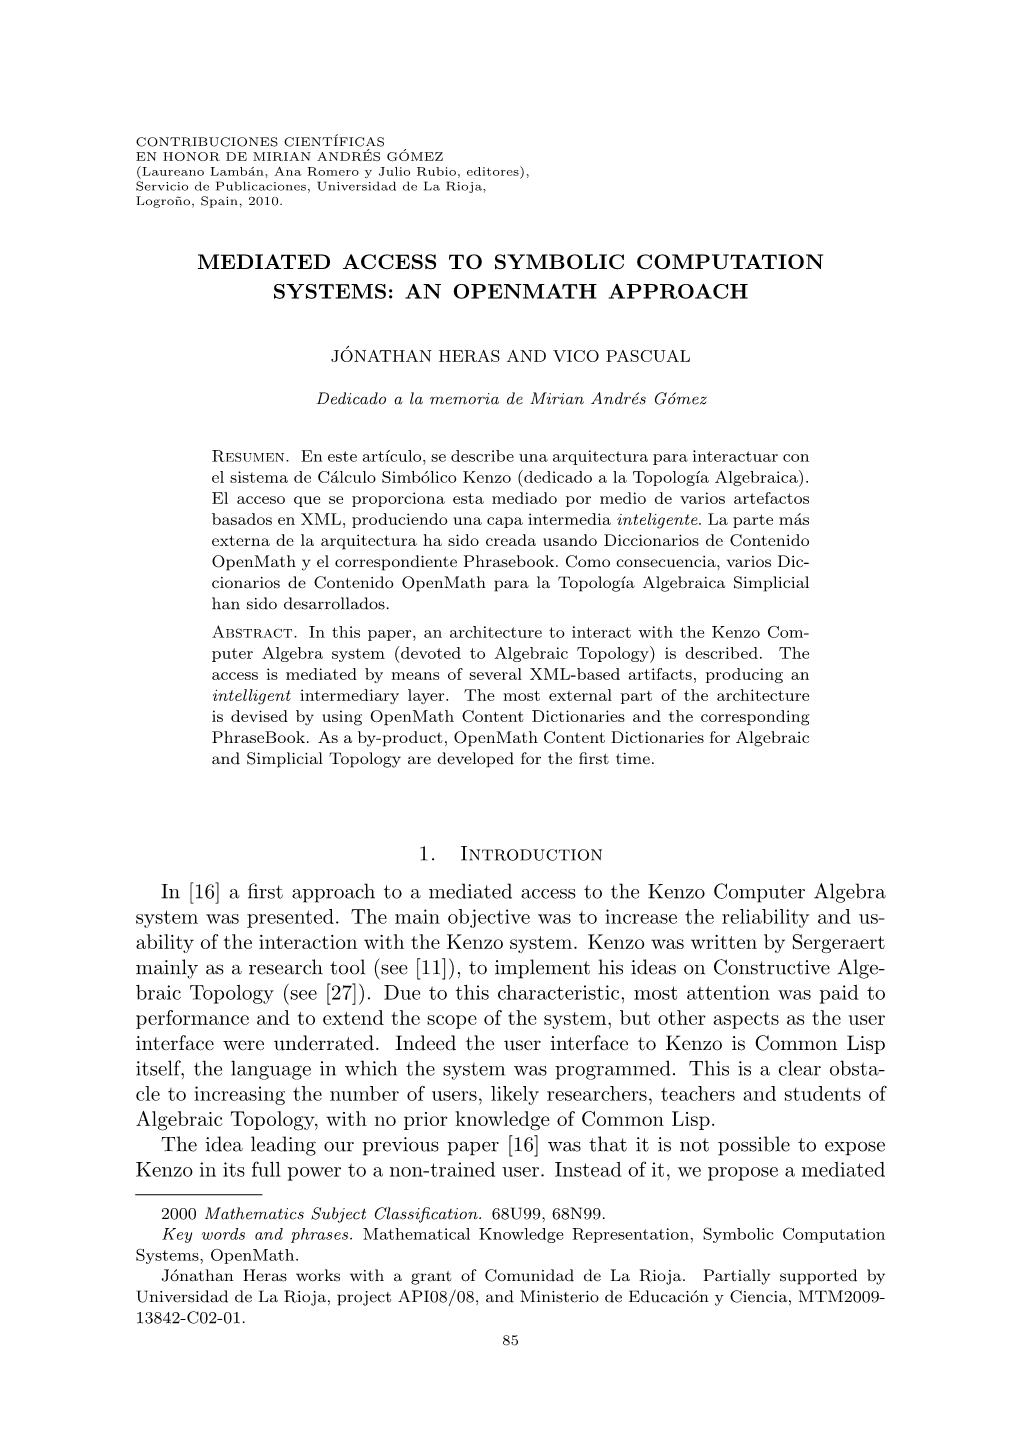 Mediated Access to Symbolic Computation Systems: an Openmath Approach